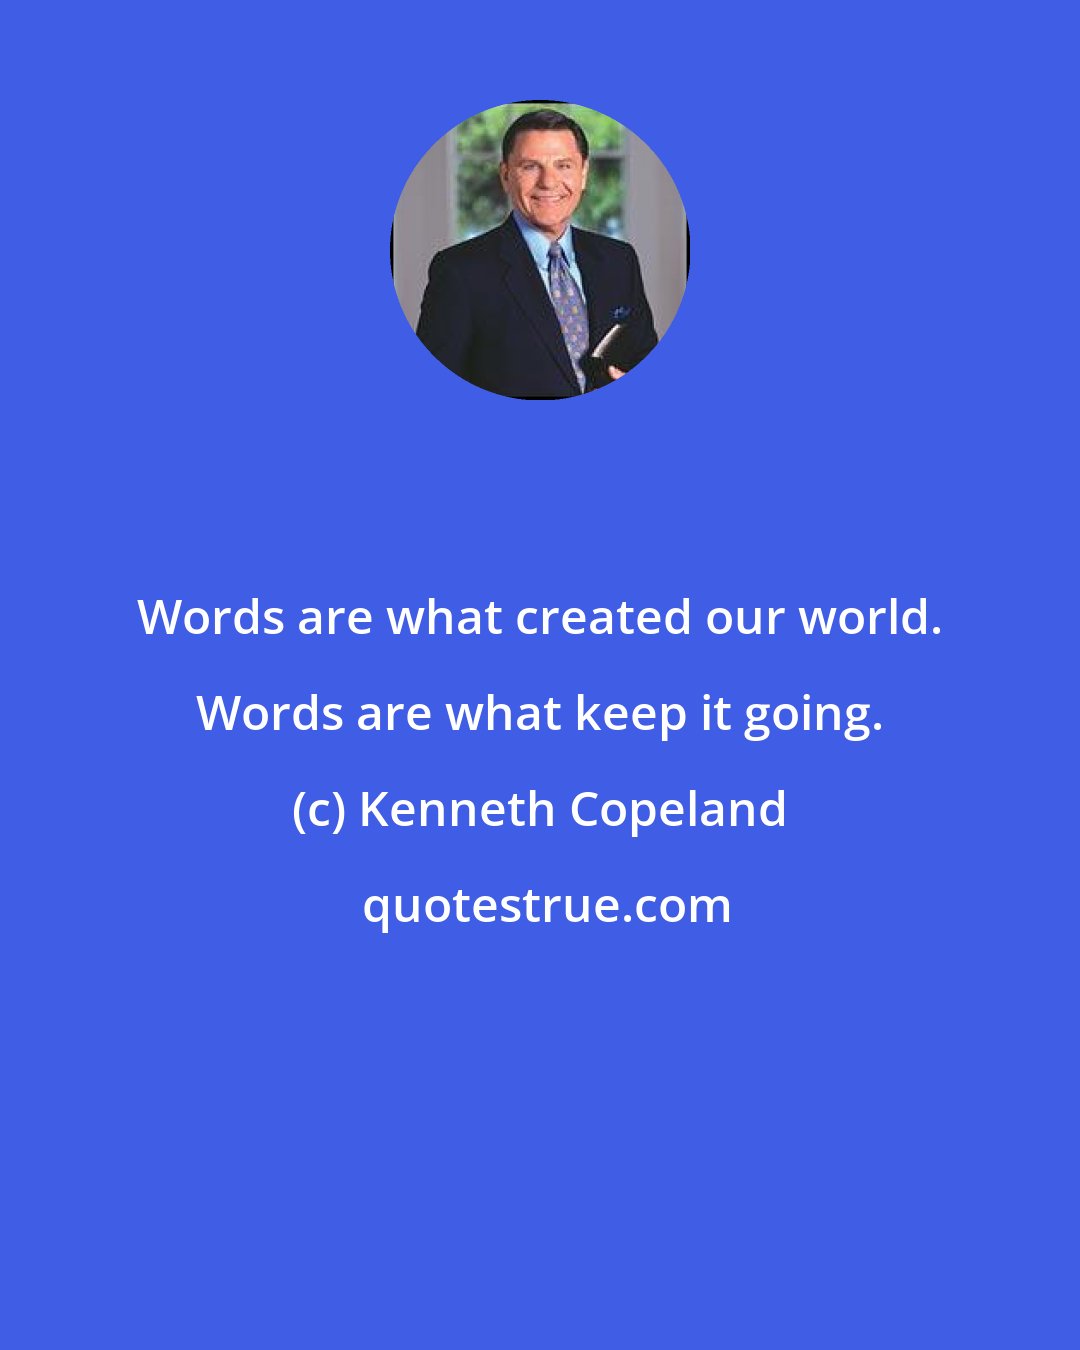 Kenneth Copeland: Words are what created our world. Words are what keep it going.